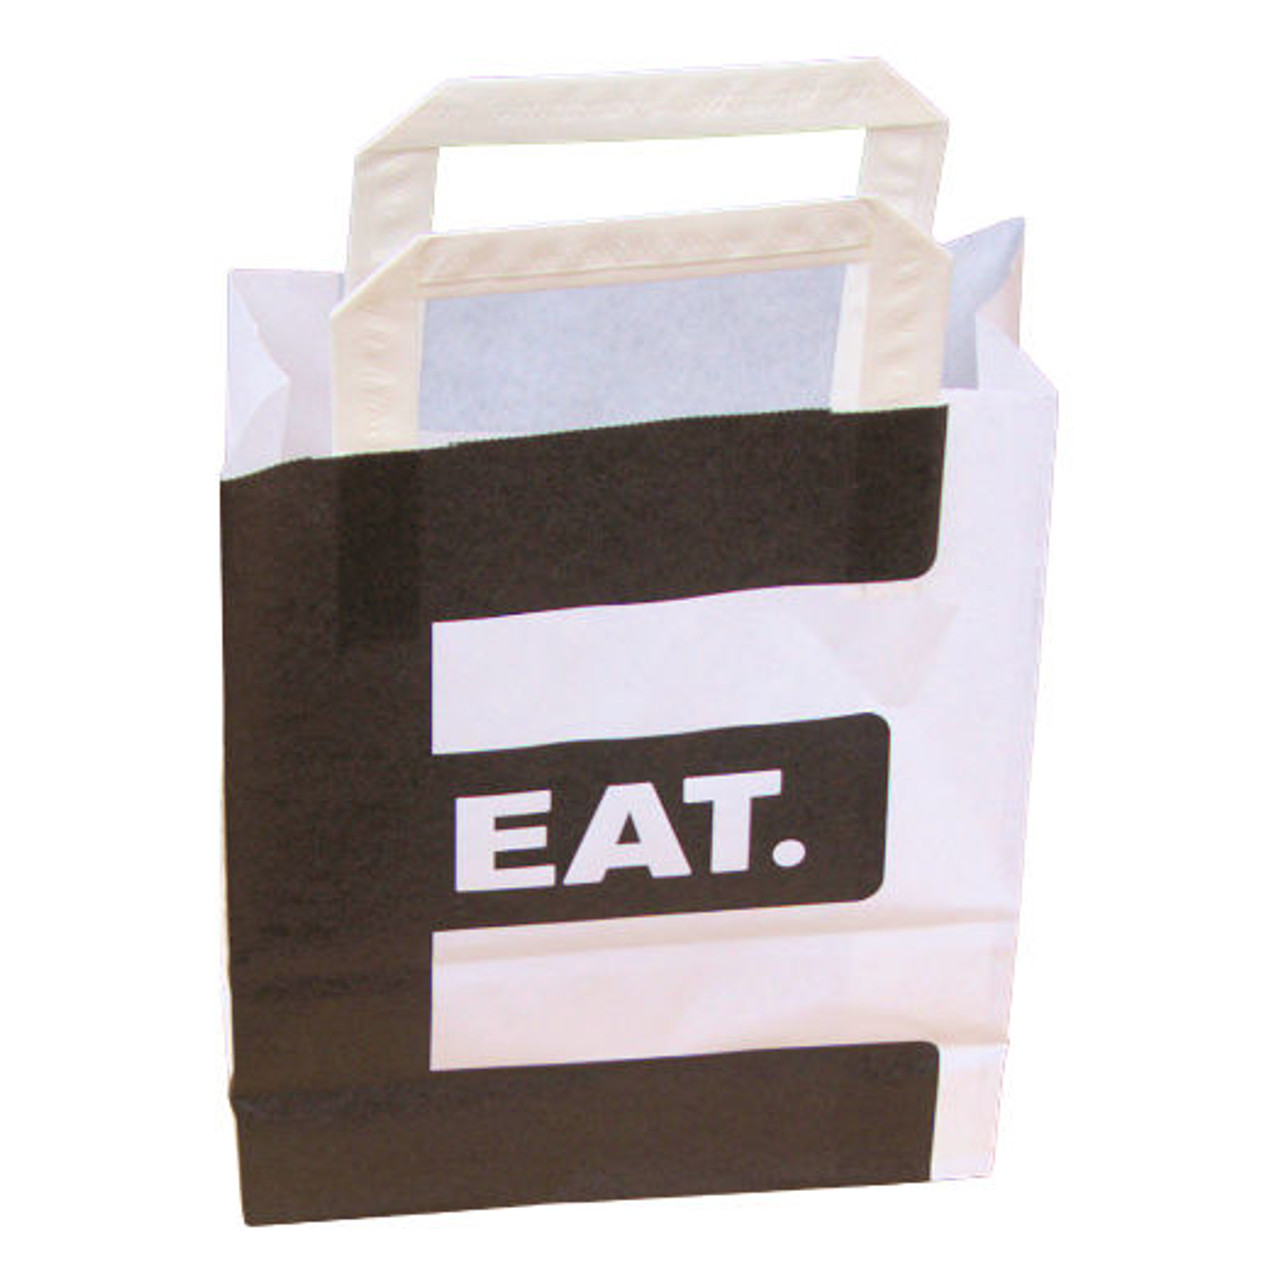 White Paper Takeaway Carrier Bag  Small Printed " EAT "  Case of 500